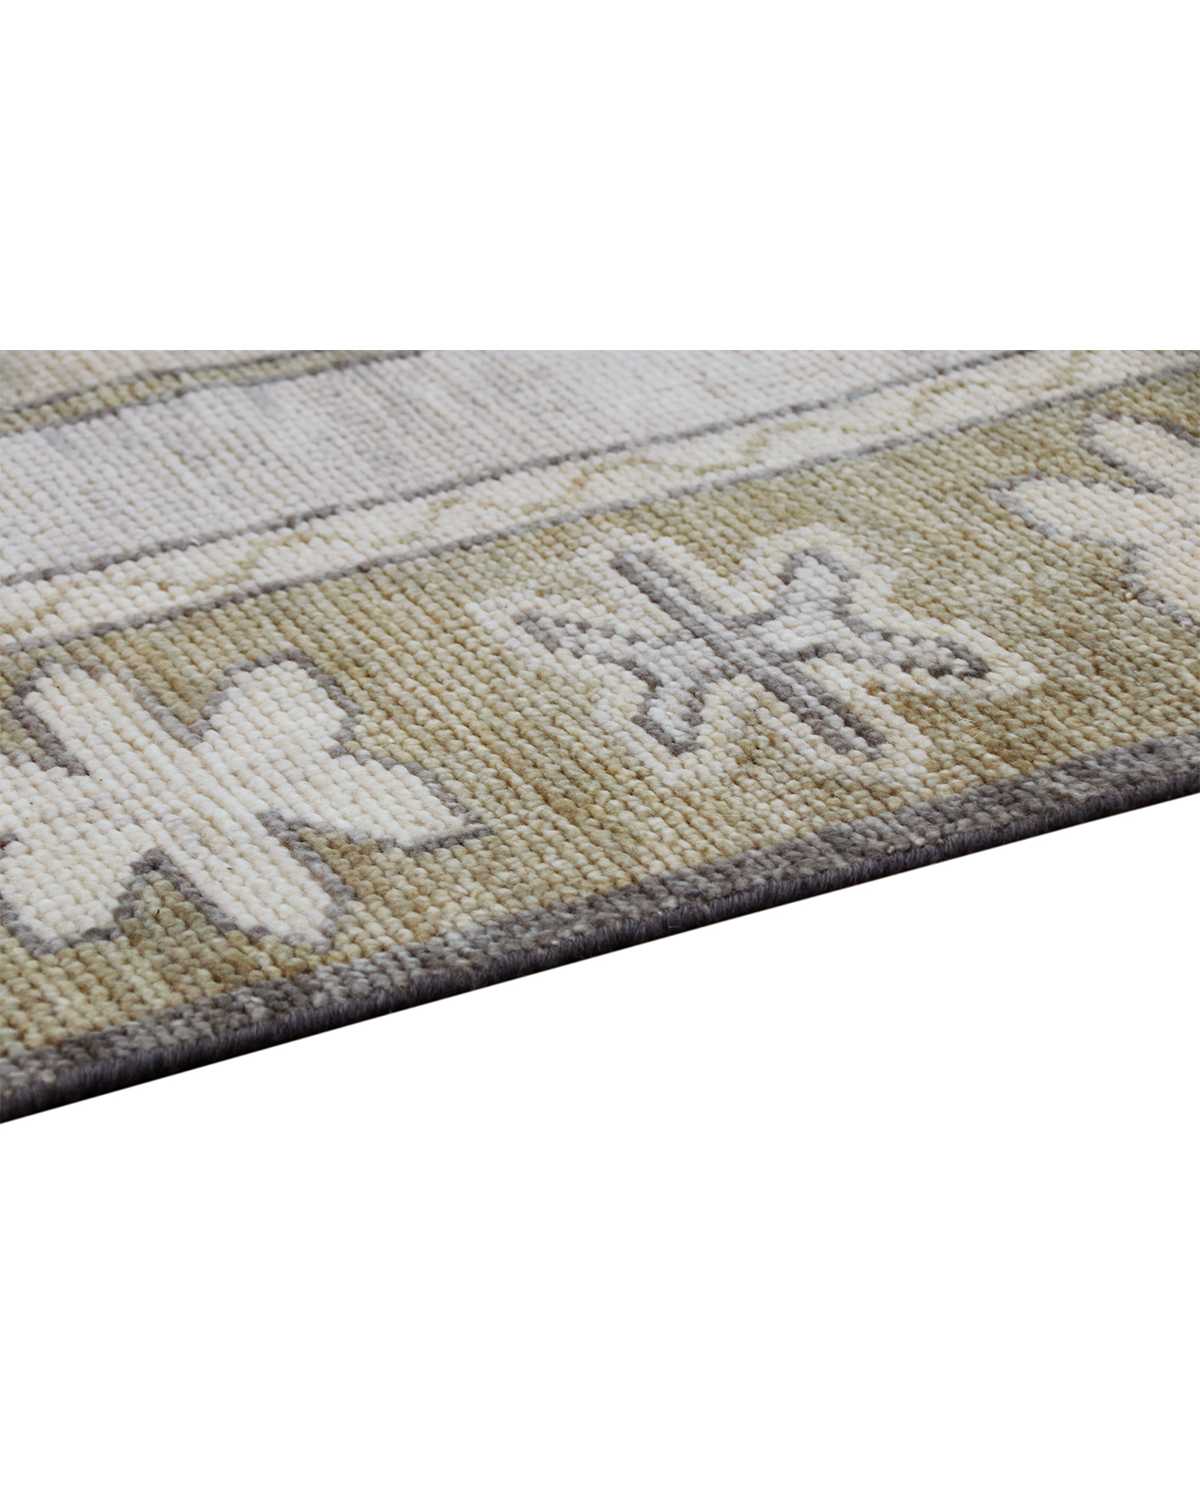 Hand-knotted Transitional Rug (CAD2022-30A)